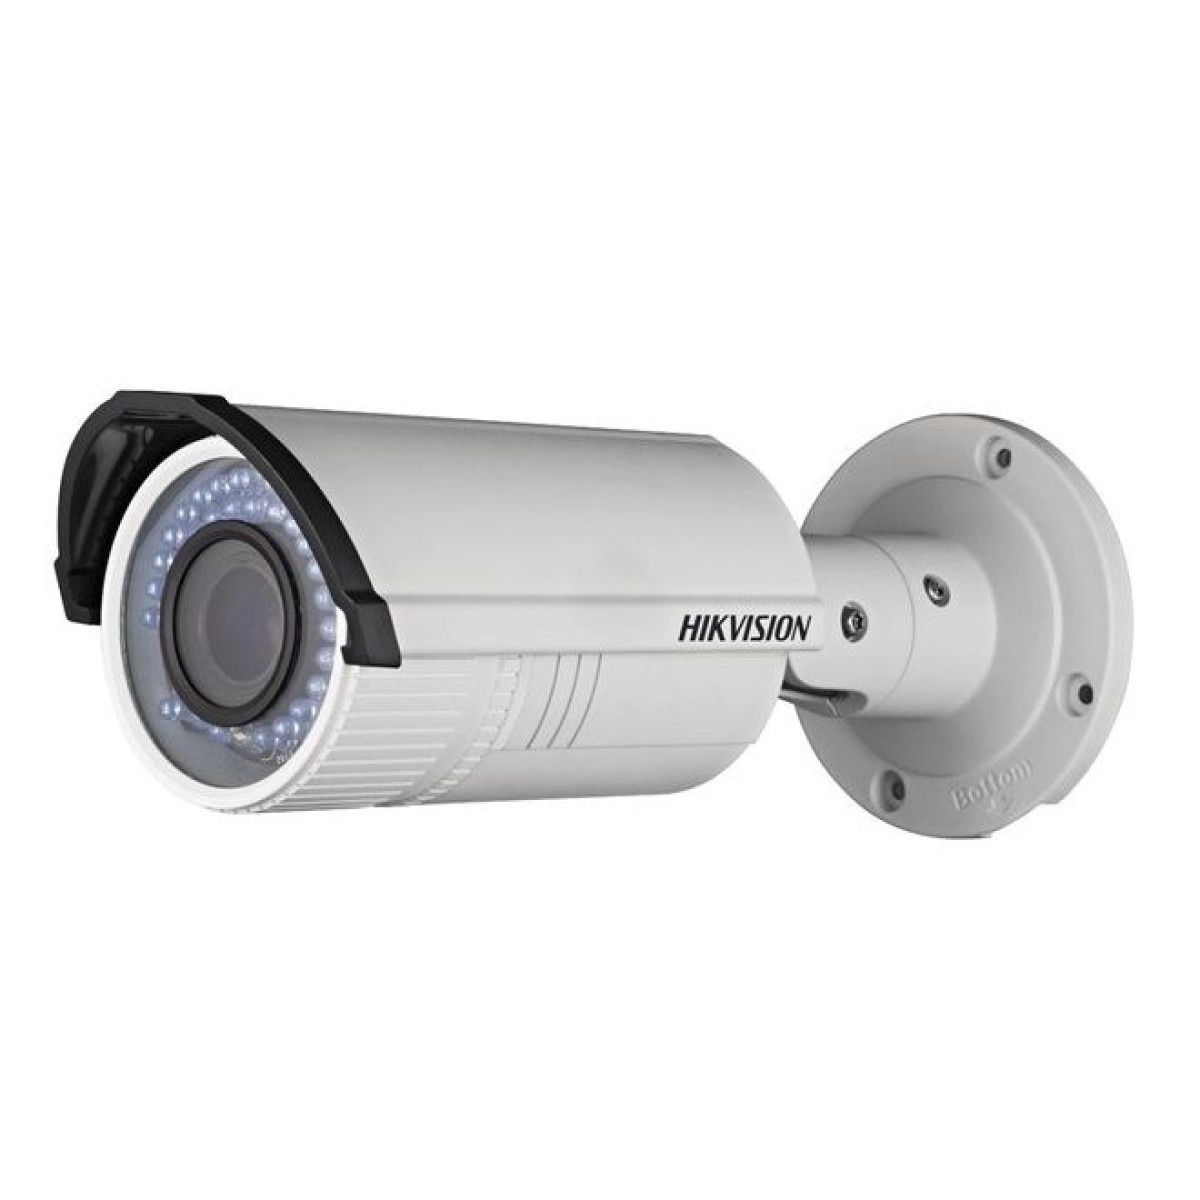 IP-камера Hikvision DS-2CD2622FWD-IS (2.8-12) 98_98.jpg